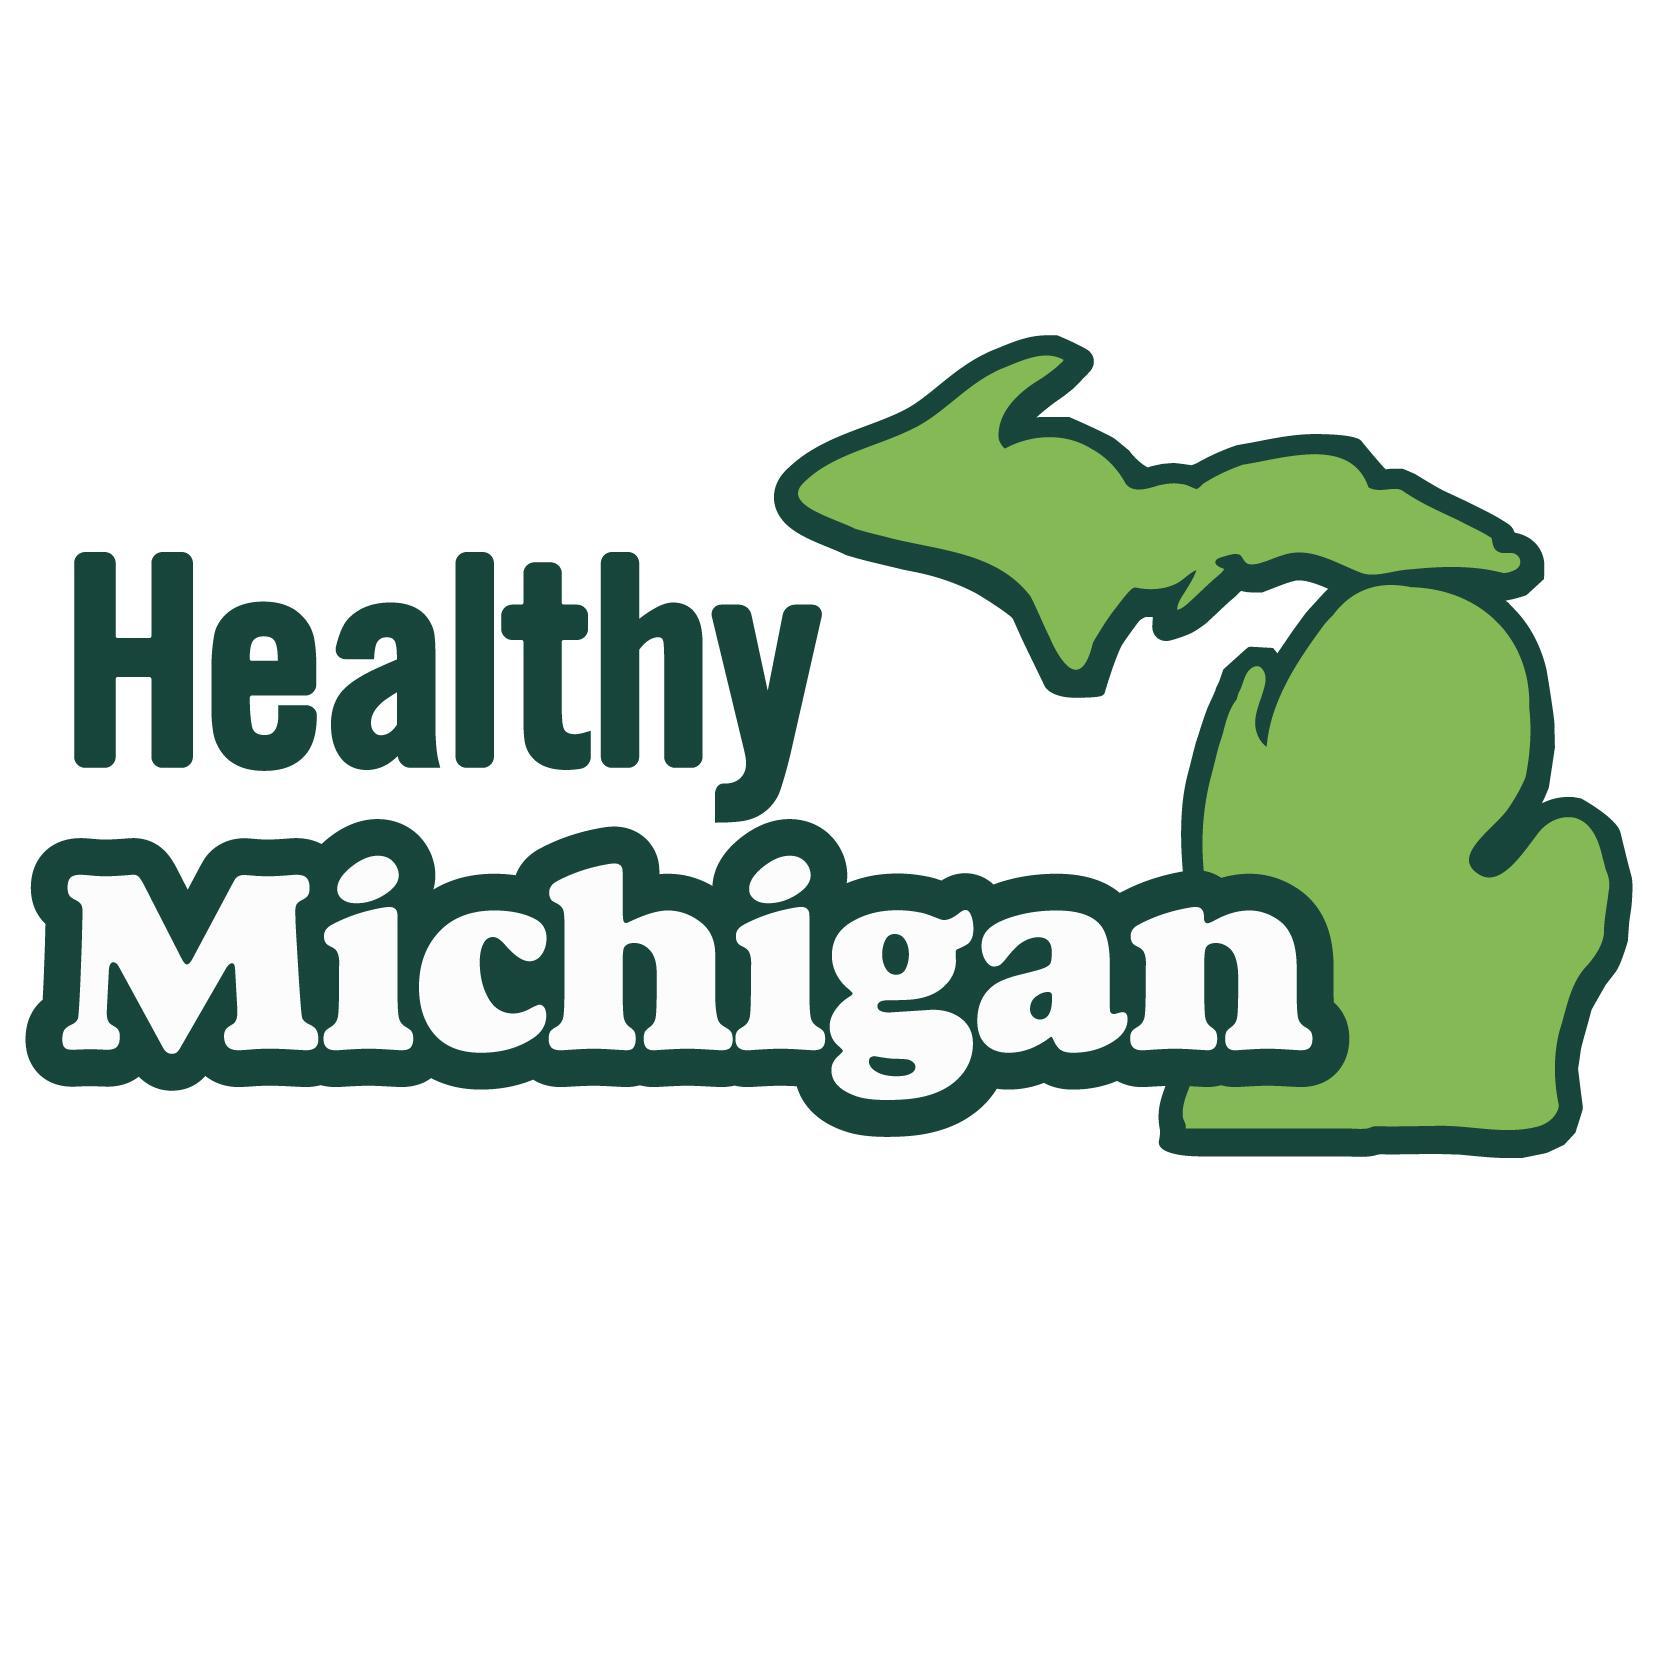 Powered by the Michigan Osteopathic Association @MichiganDOs, Healthy Michigan raising awareness about health issues & sharing  good news from our friends.